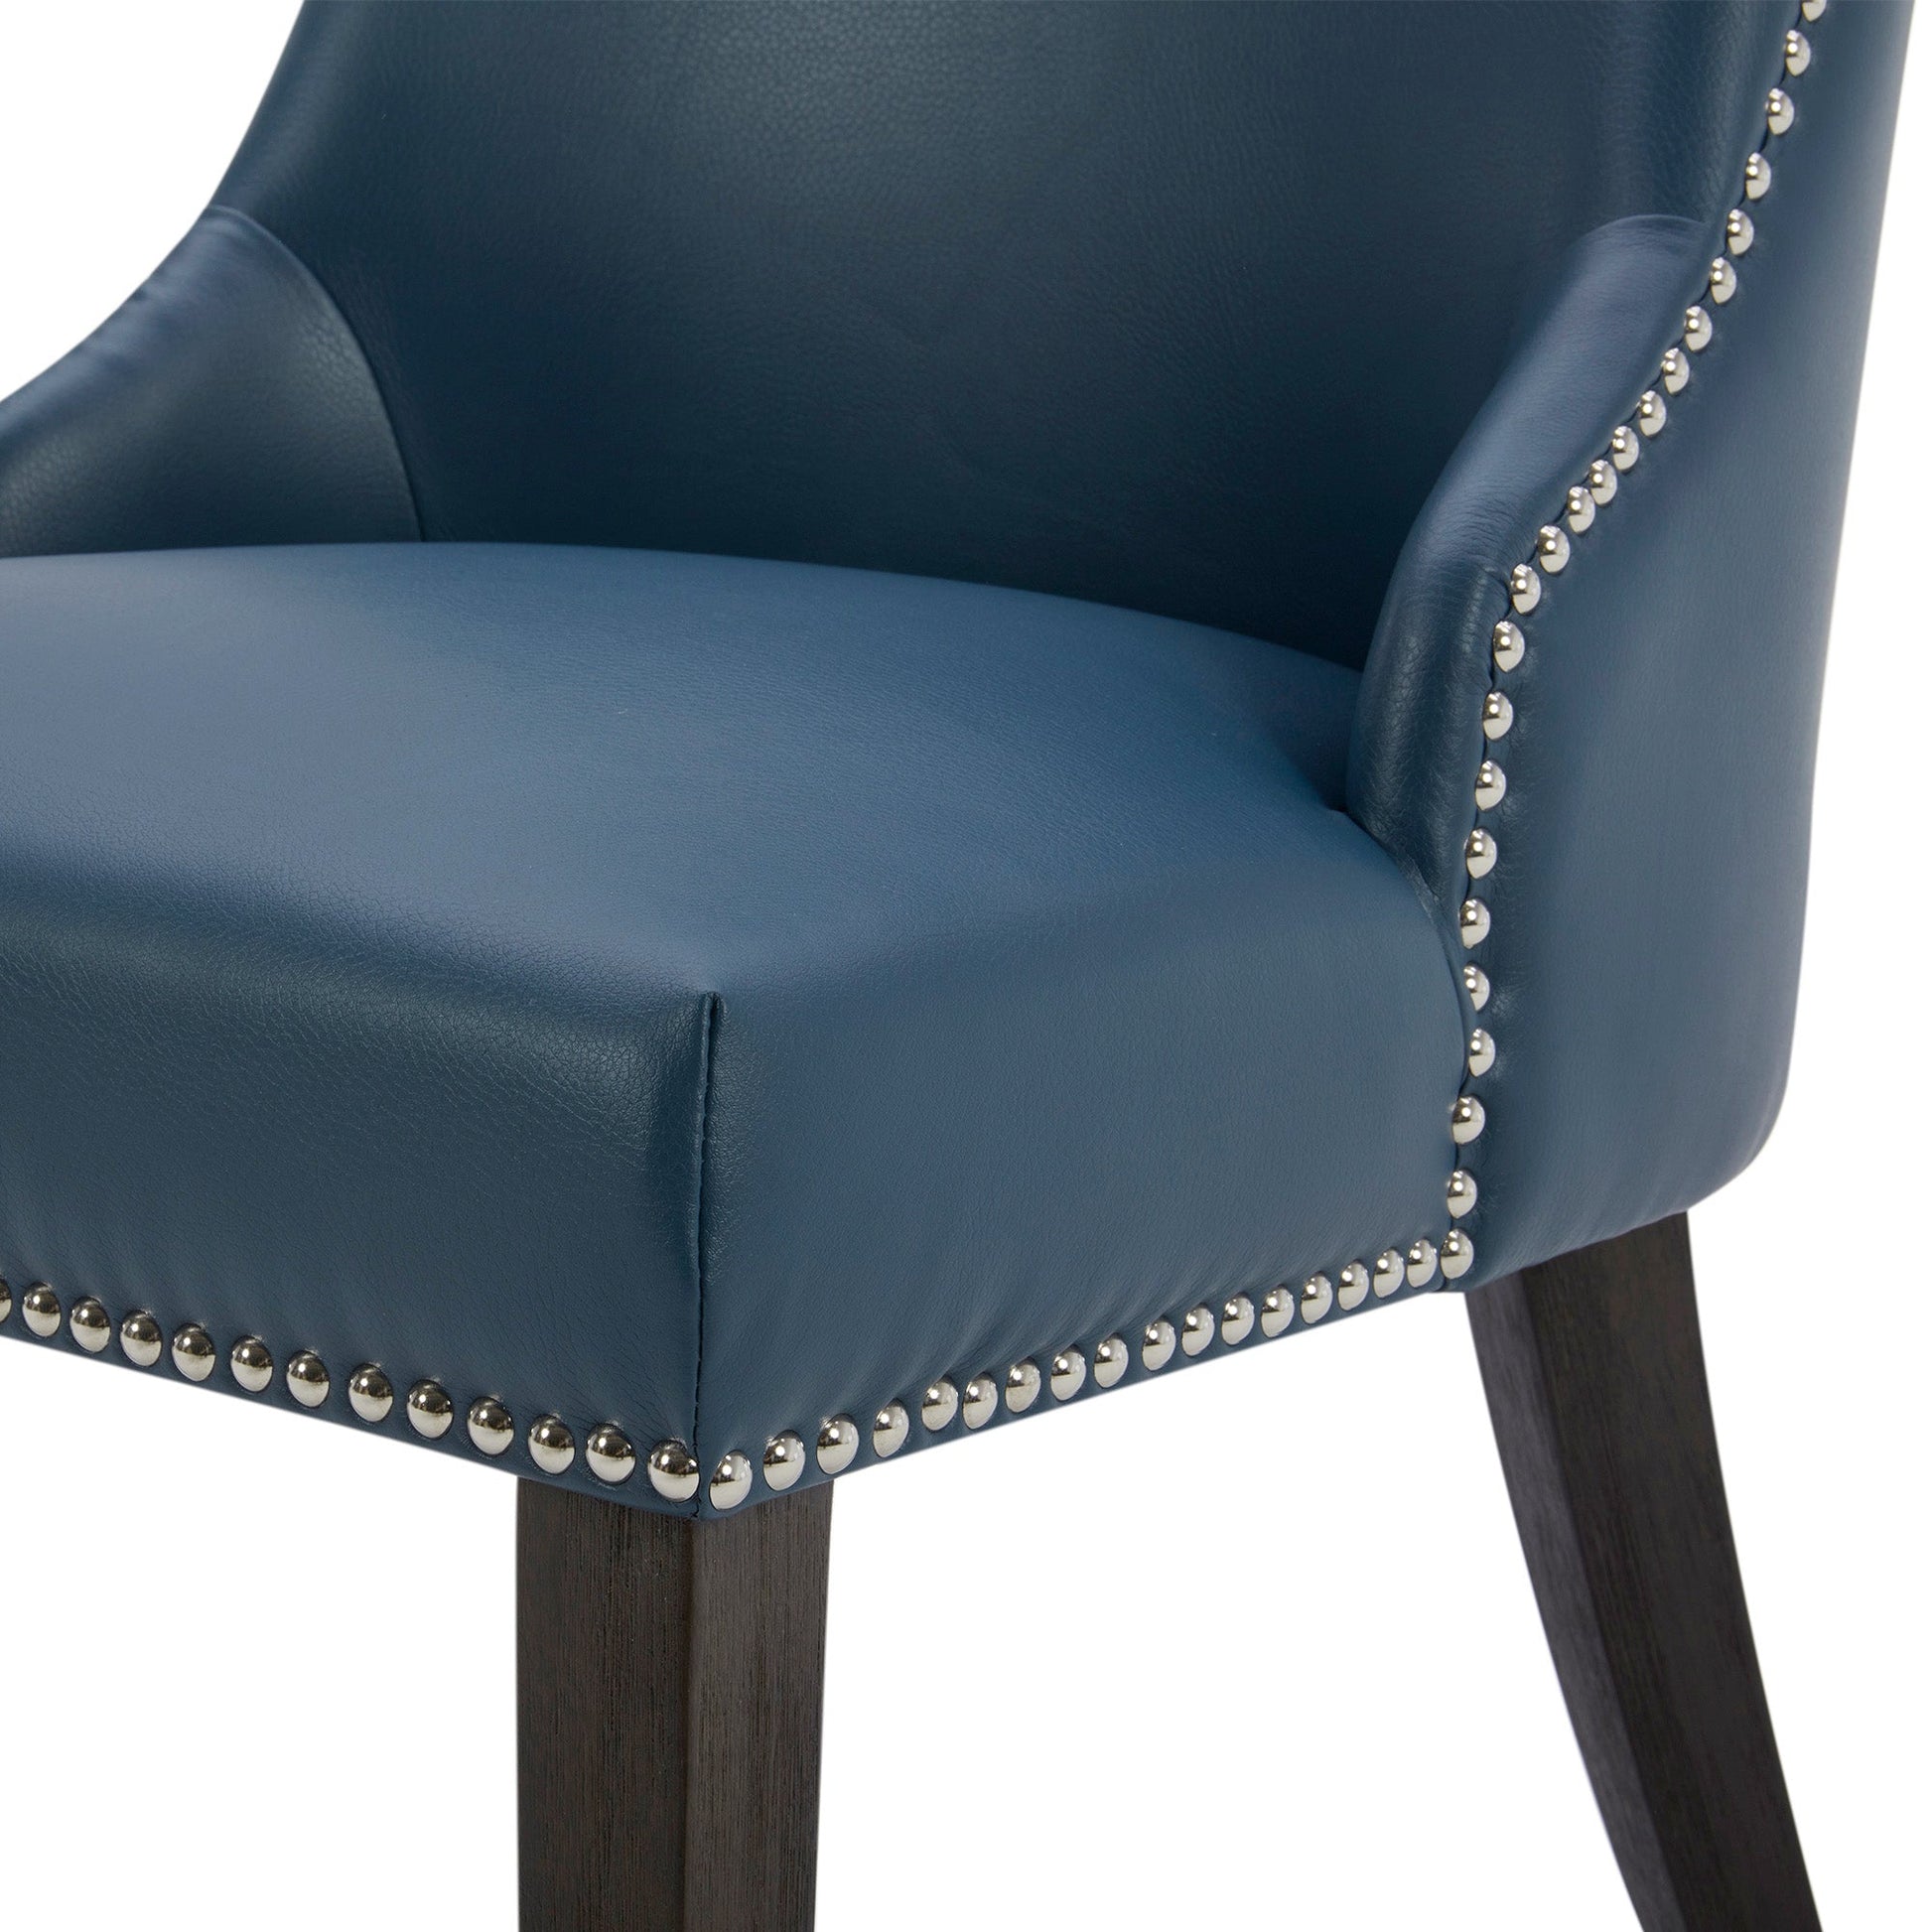 CHITA LIVING-Asher Upholstered Dining Chair with Nailhead Trim (Set of 2)-Dining Chairs-Faux Leather-Blue-